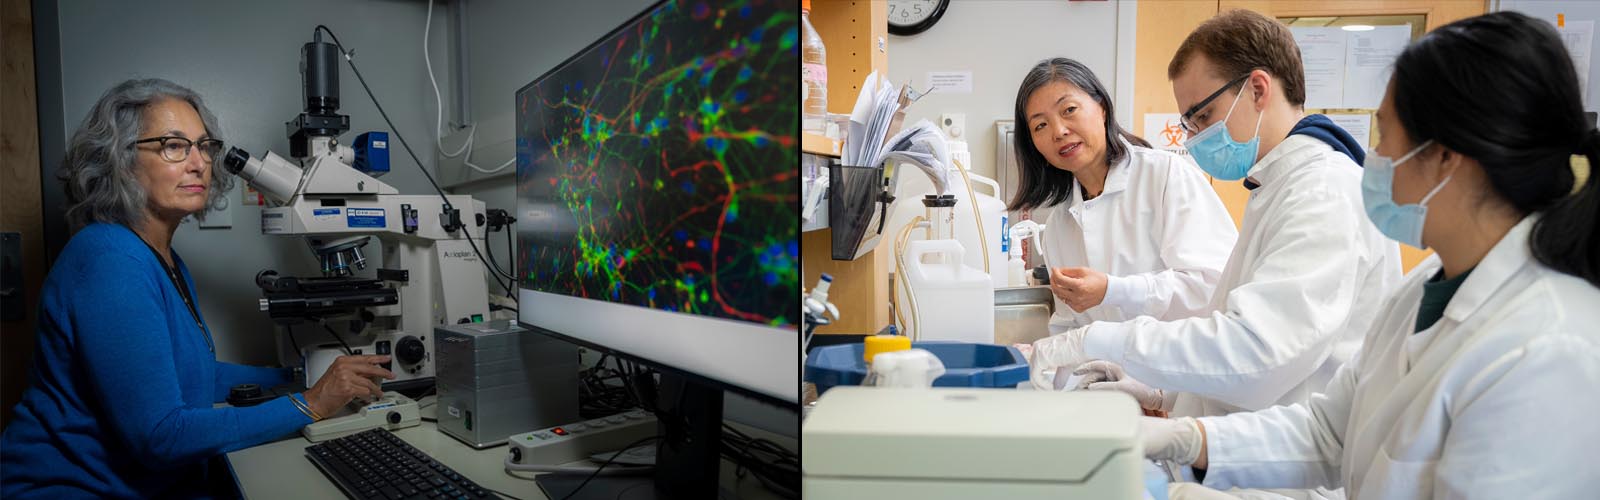 New Department of Defense Grant to Study Fragile X Syndrome in Human Cells